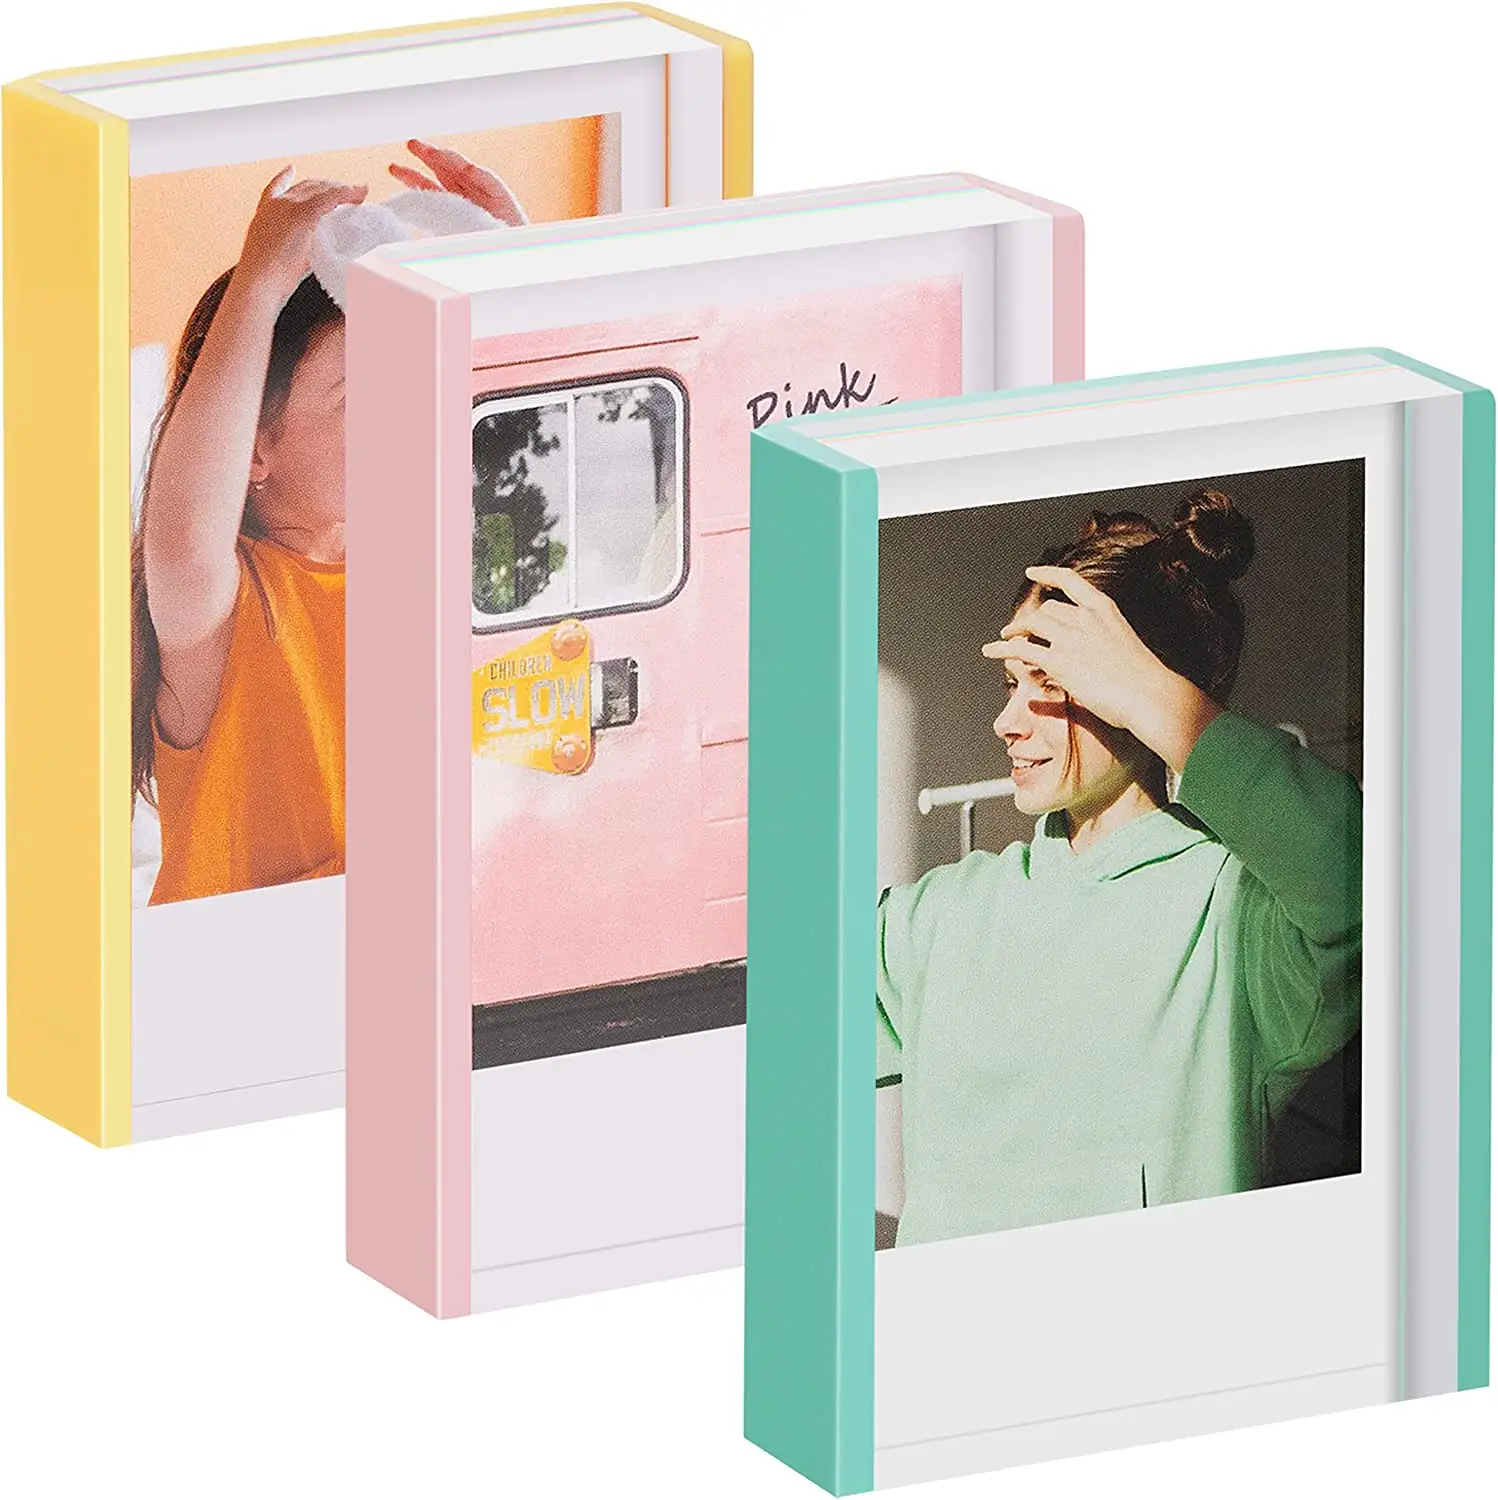 Instax Film standing desk frame Mini Photo Display for Office & Home, Acrylic Picture Frame for Family, Friends, Art